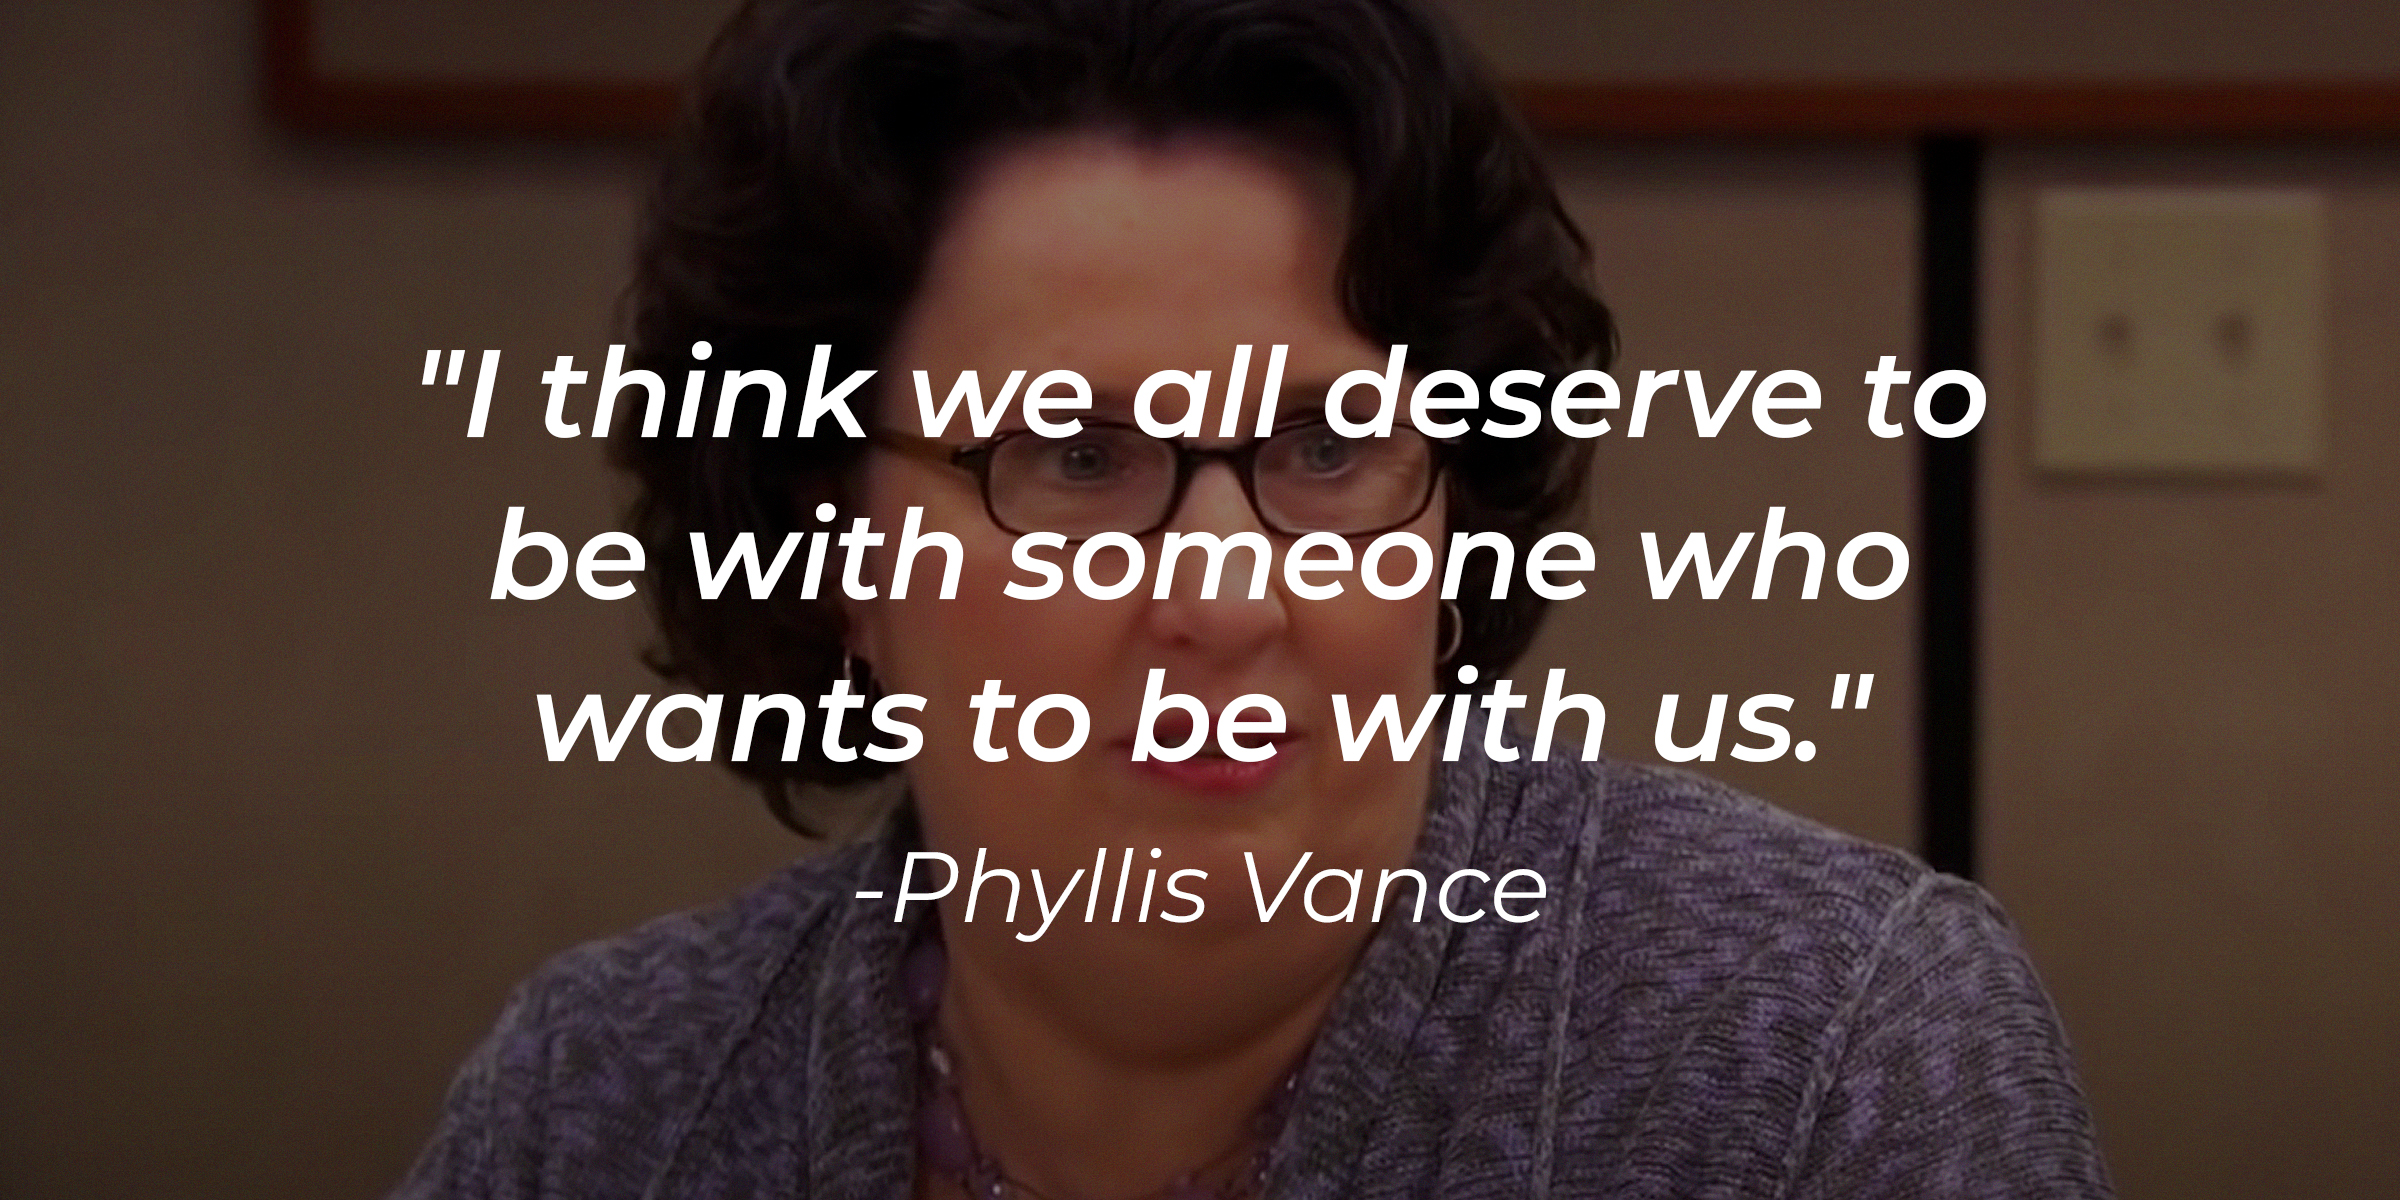 Phyllis Vance's quote: "I think we all deserve to be with someone who wants to be with us. | Source: YouTube/TheOffice